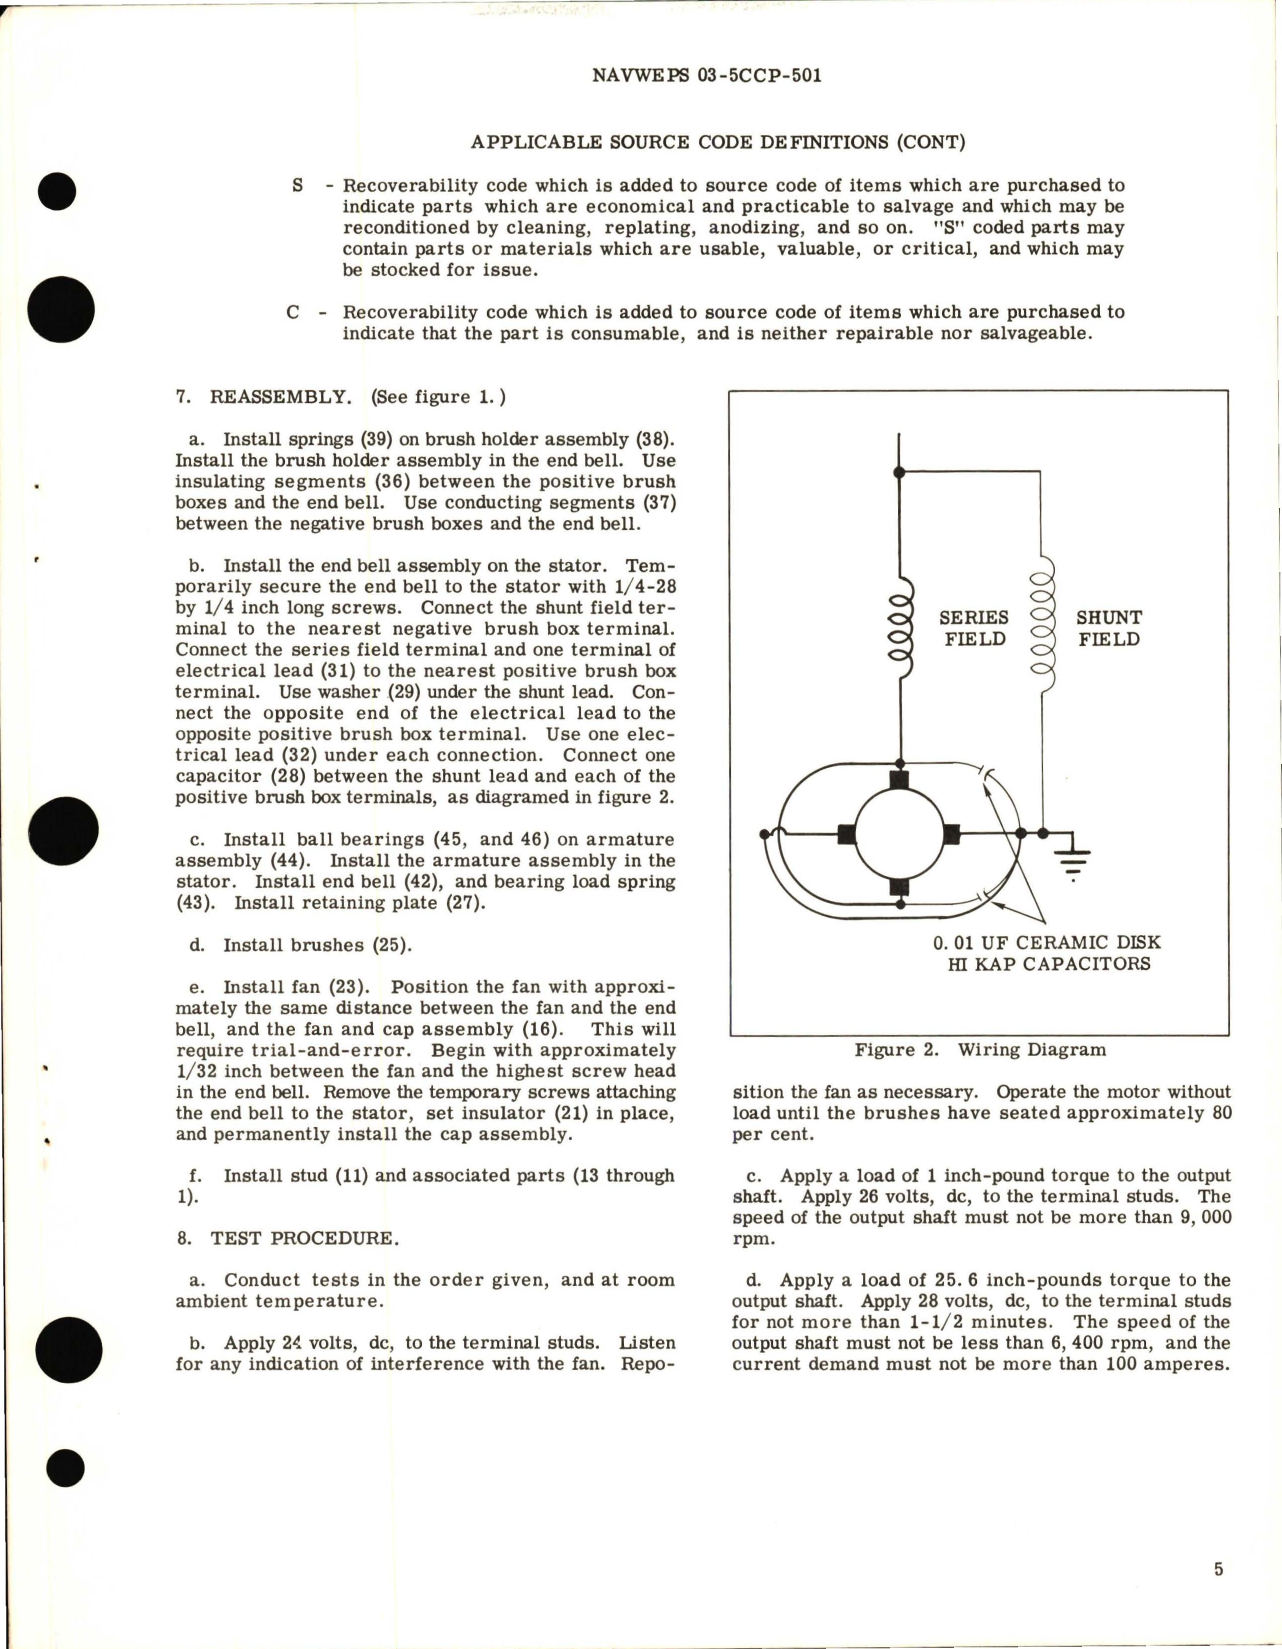 Sample page 5 from AirCorps Library document: Overhaul Instructions with Parts Breakdown for Direct Current Motor - Part D479 and D479-1 